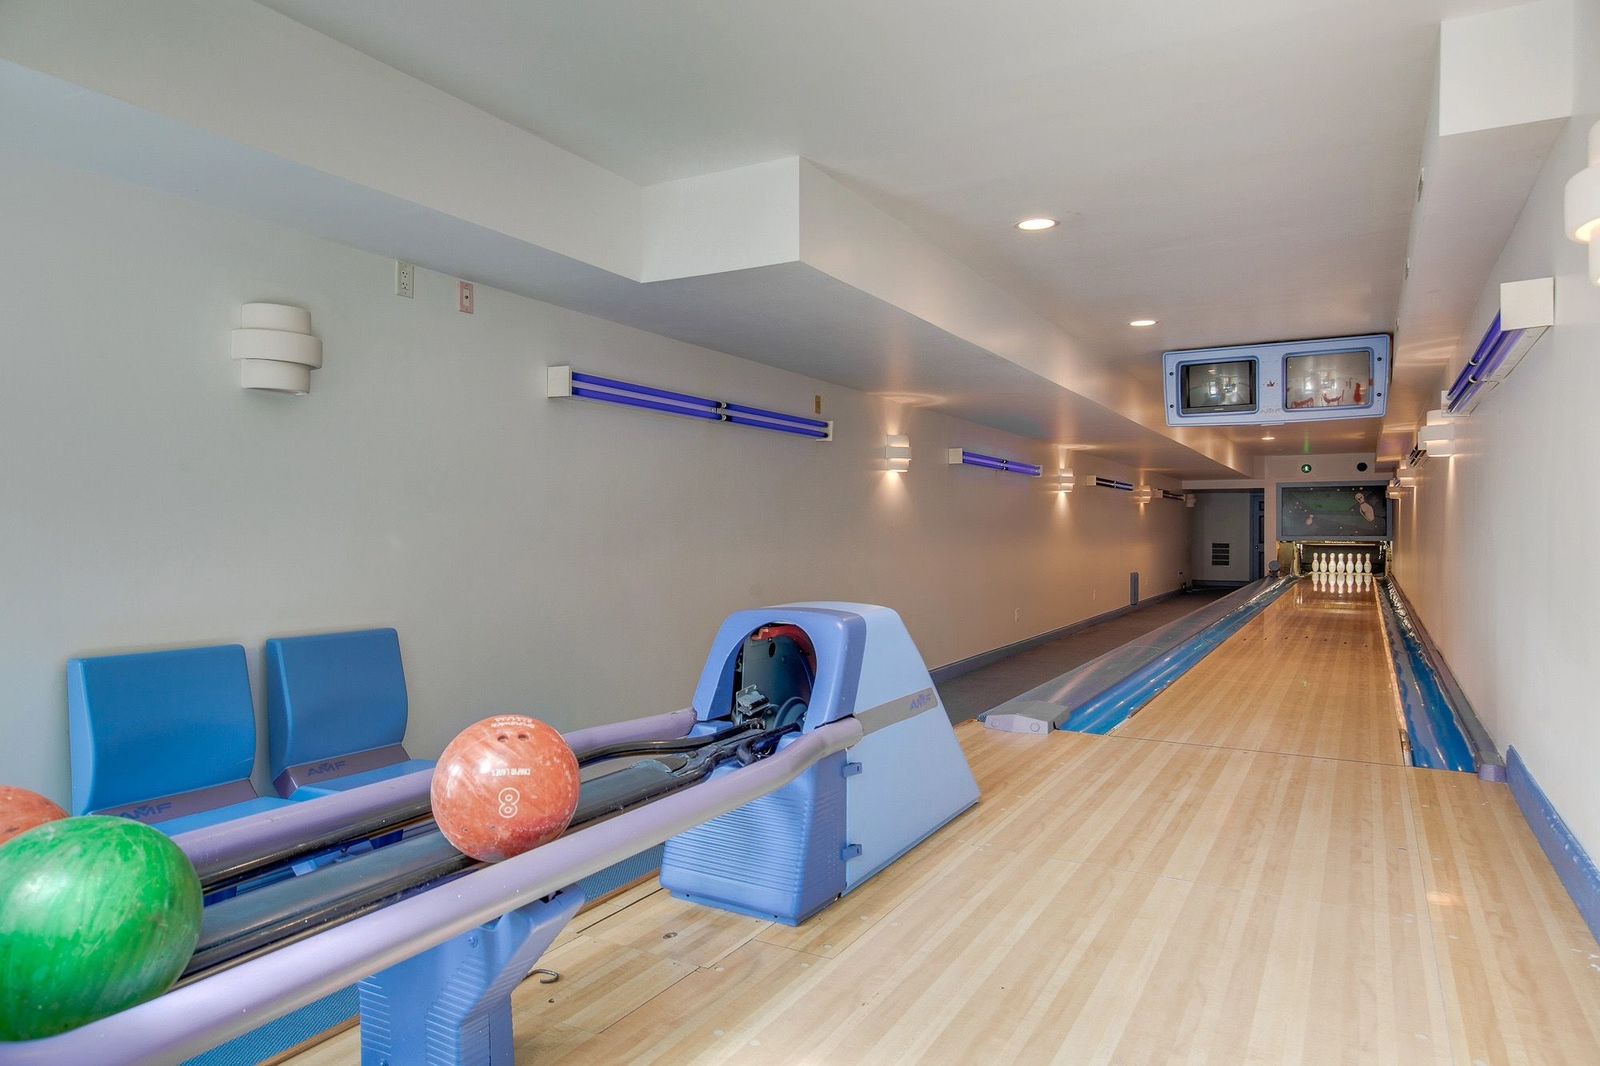 151 Haggetts Pond Road bowling alley